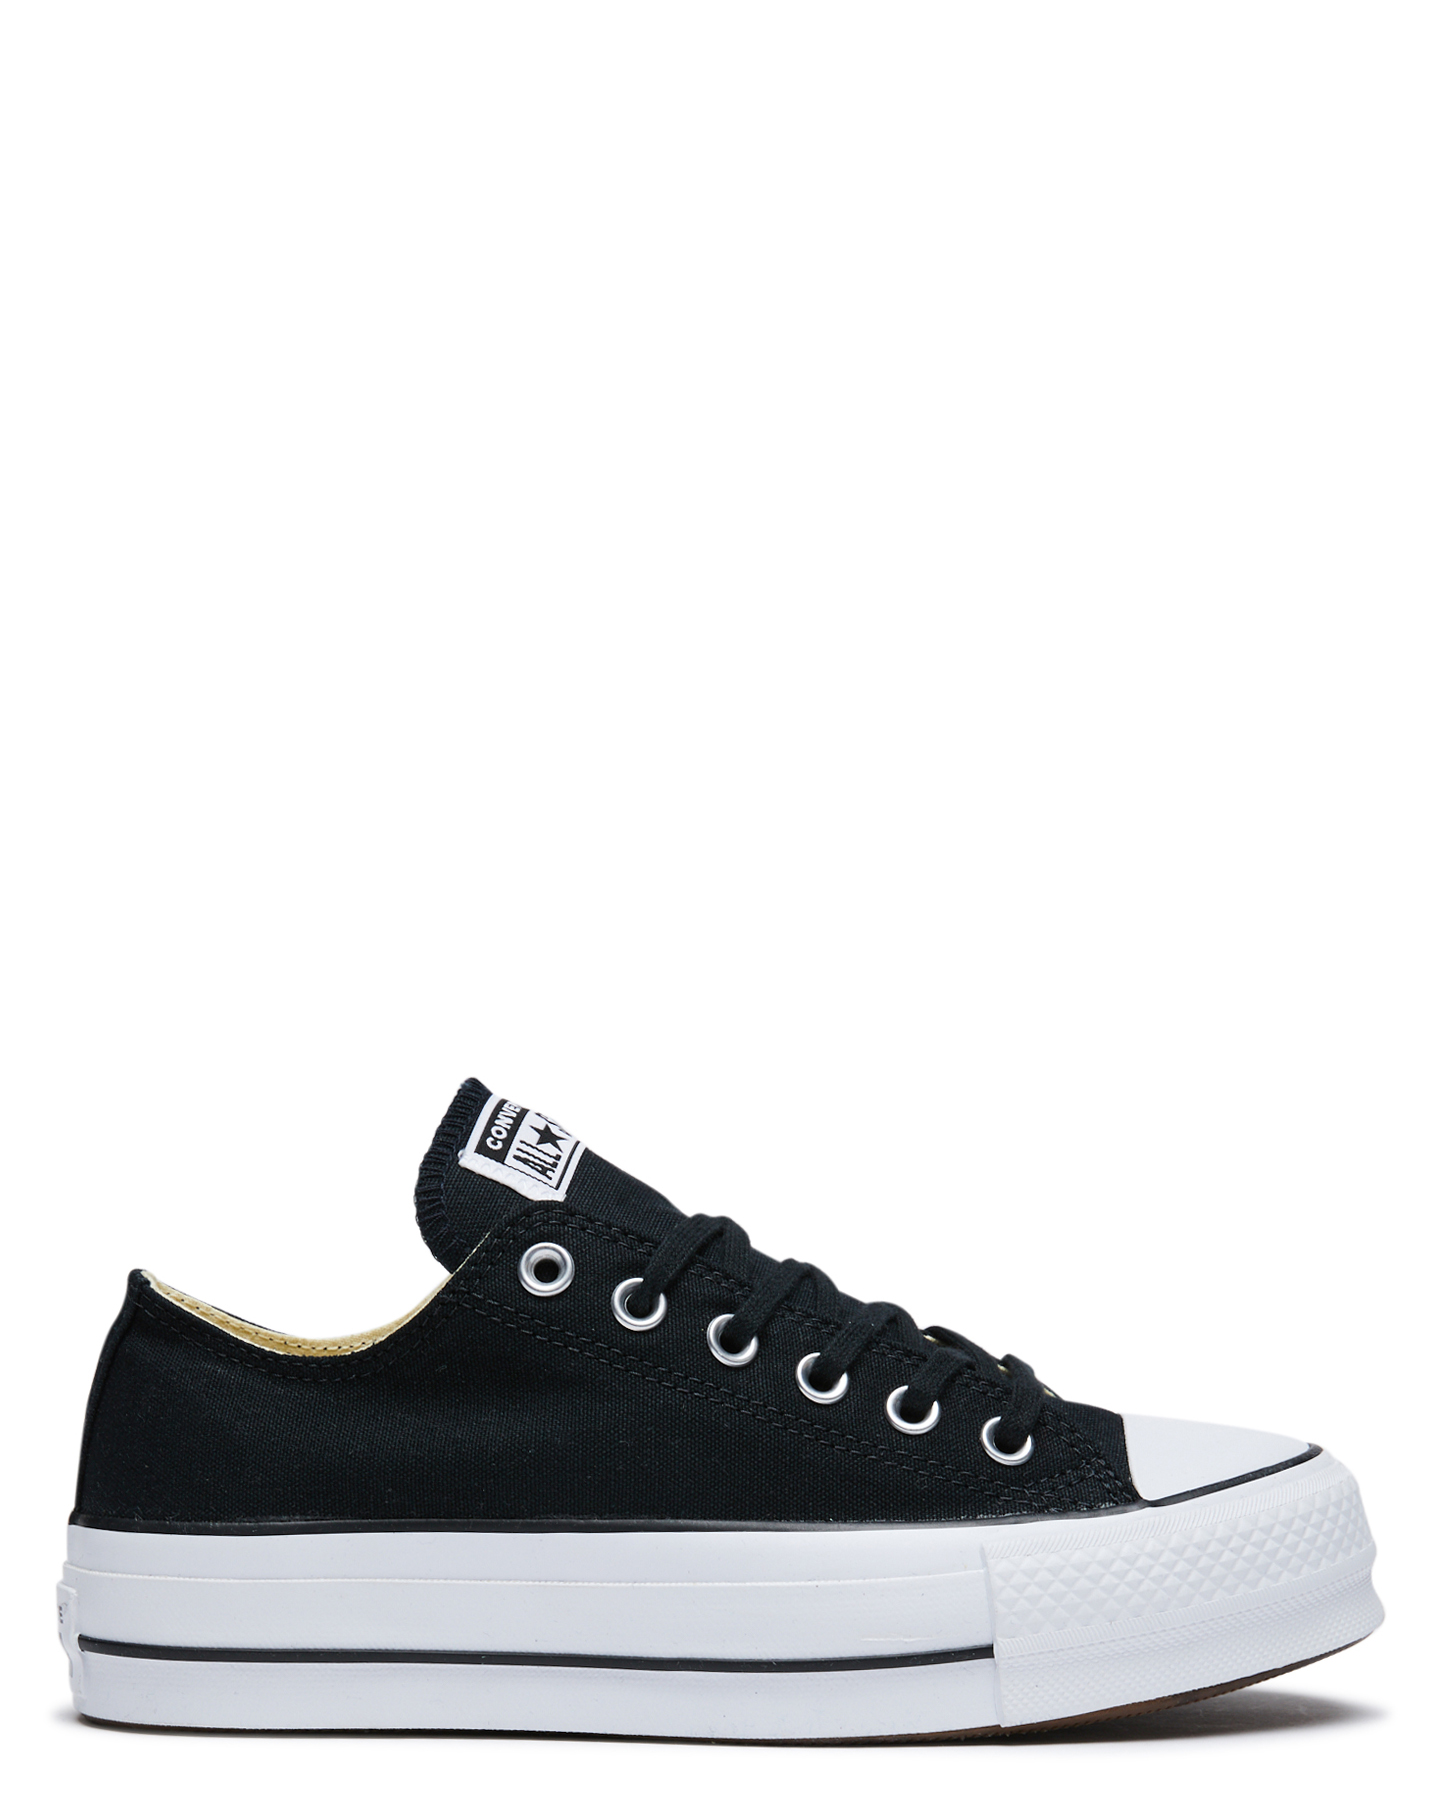 converse ox sneakers | Sale OFF-65%